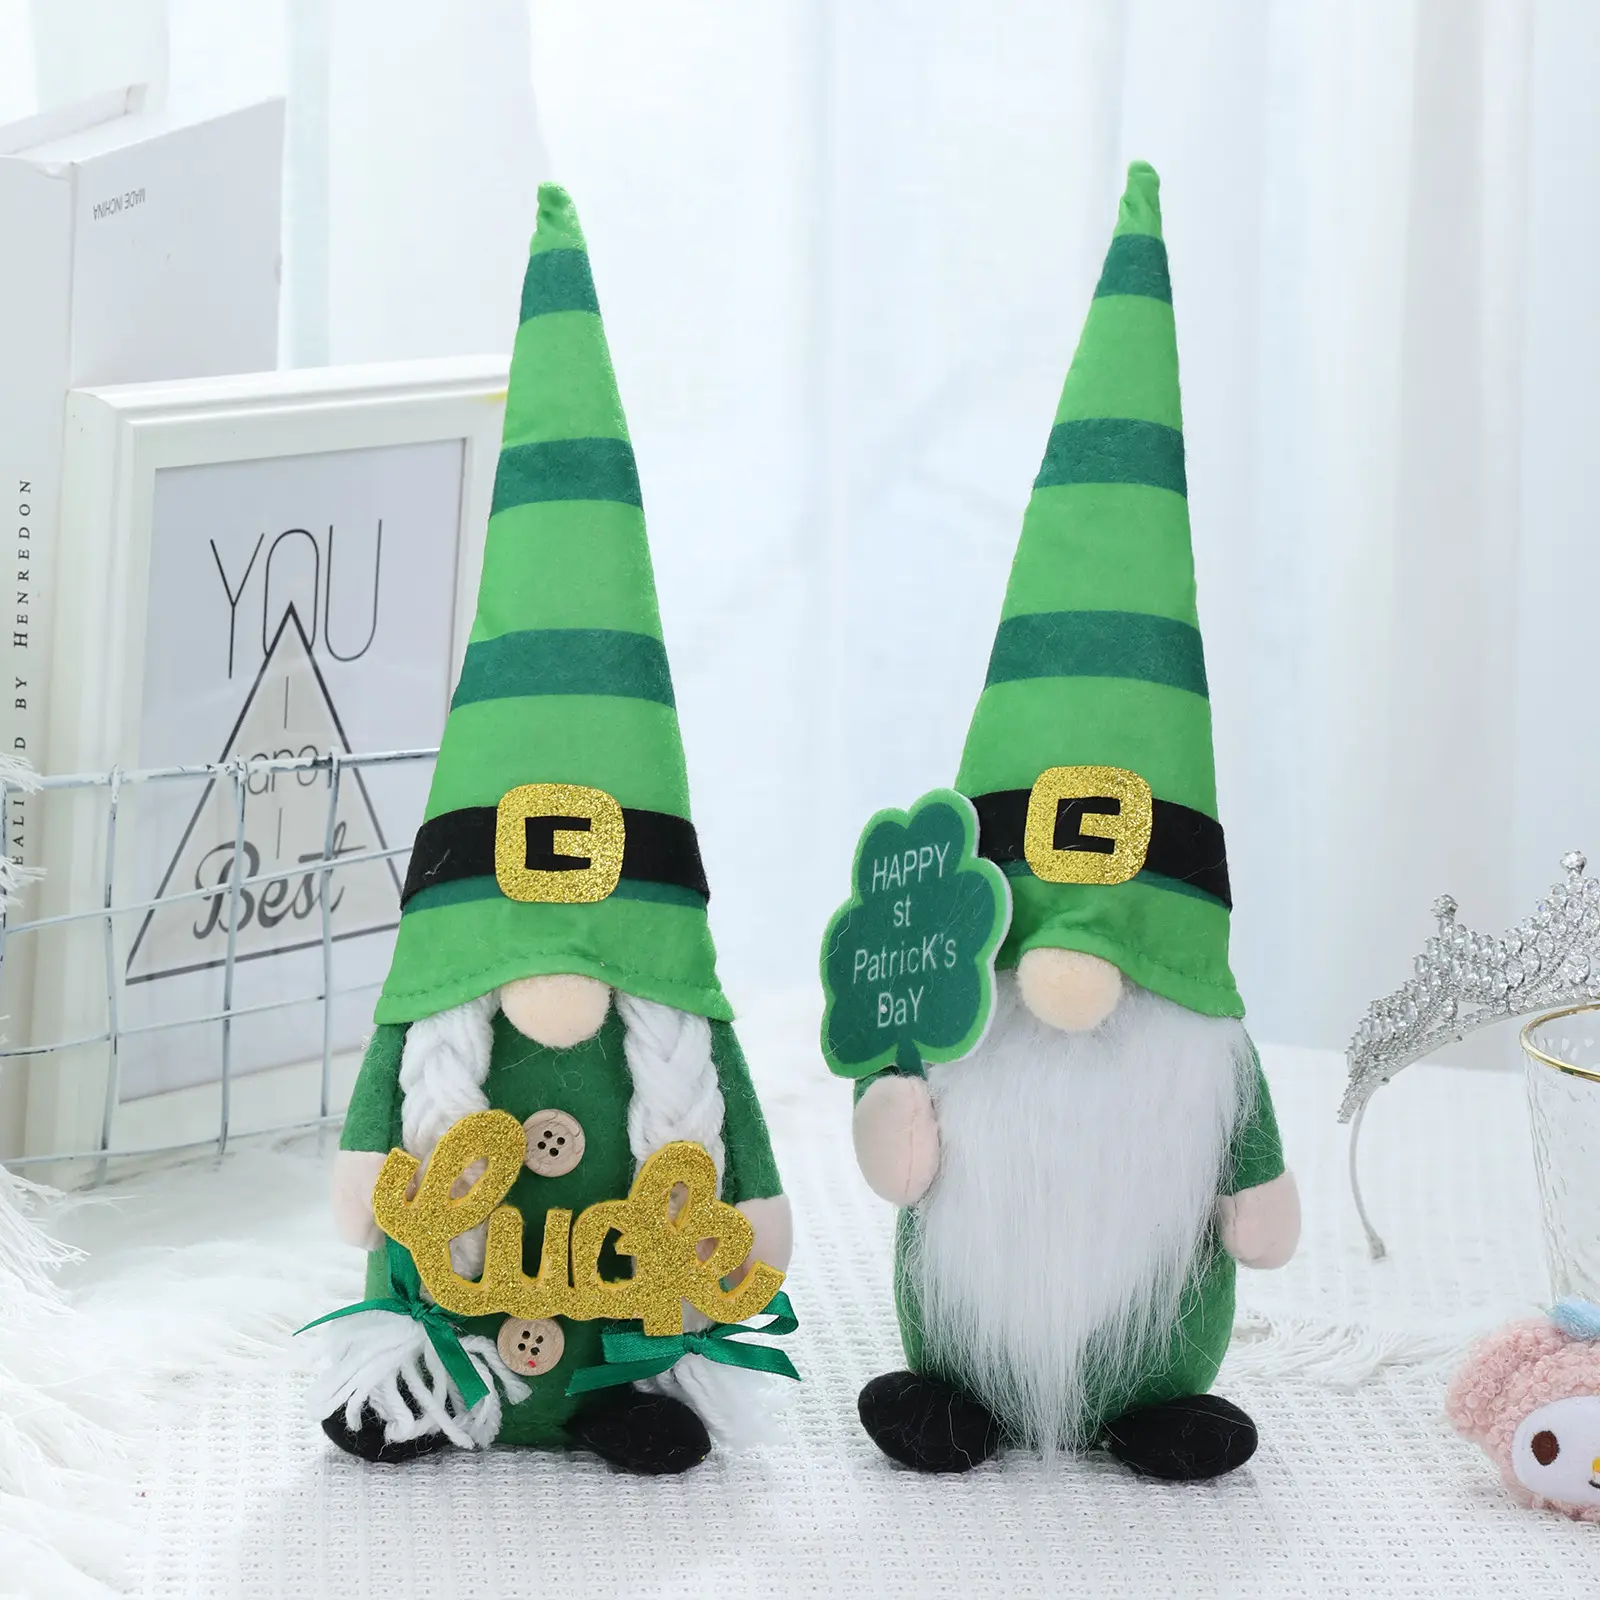 2023 Festive Christmas Green Standing Faceless Dolls Ornaments Home Decoration Luxury For St. Patrick's Day Festival Supplies